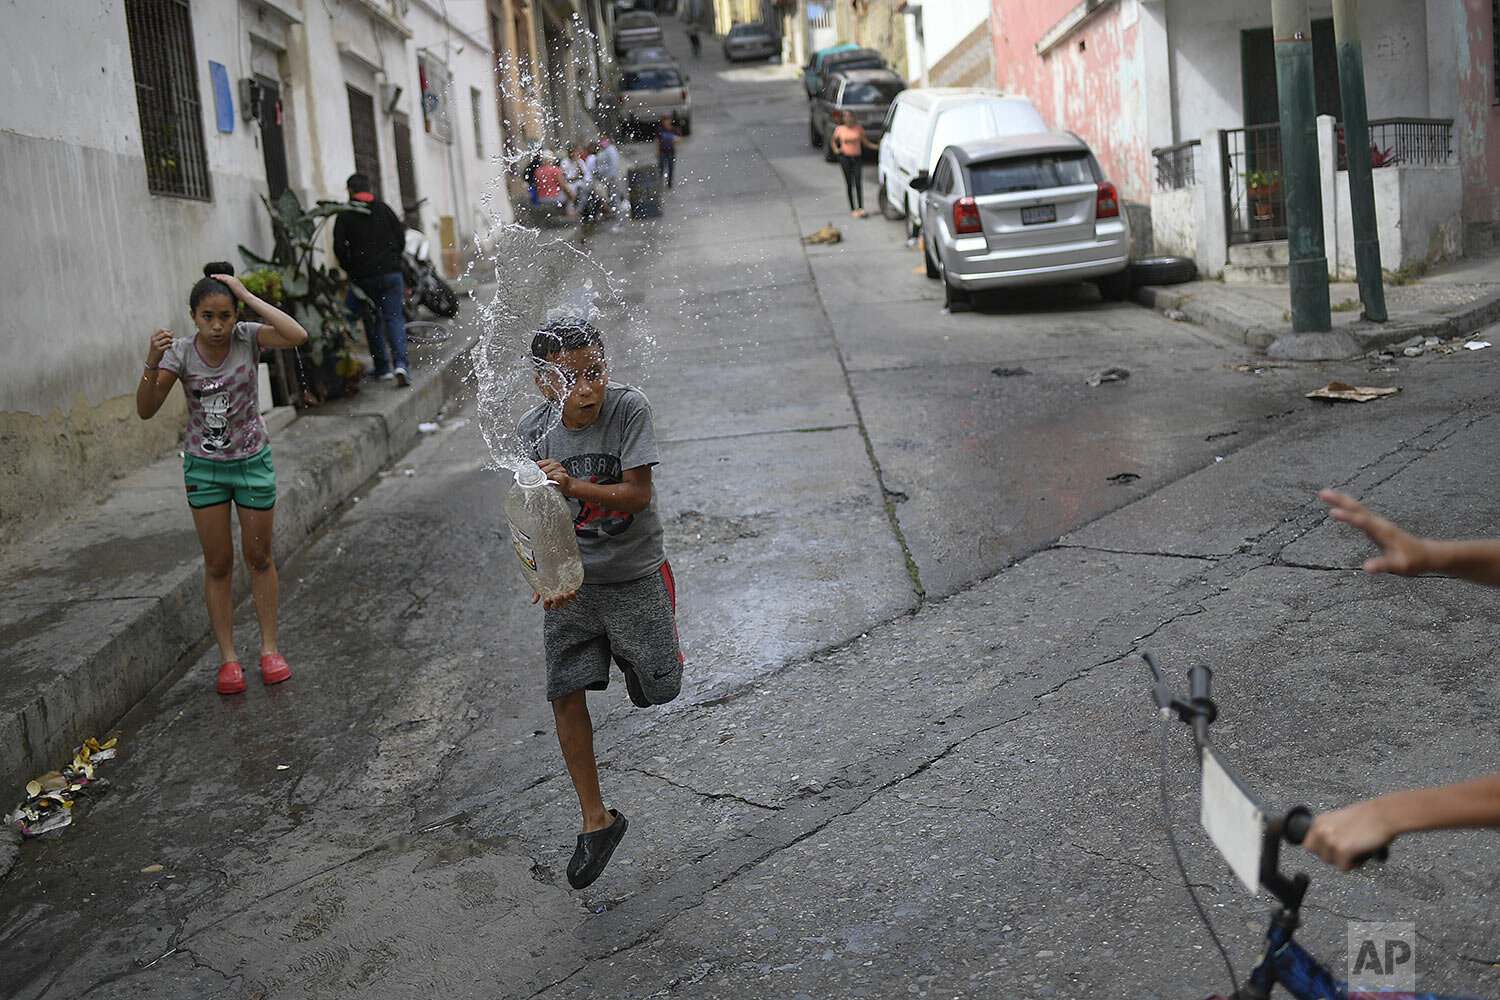  A boy prepares to playfully drench a friend with a water in the Amparo neighborhood of Caracas, Venezuela, Jan. 21, 2021, amid the COVID-19 pandemic. (AP Photo/Matias Delacroix) 